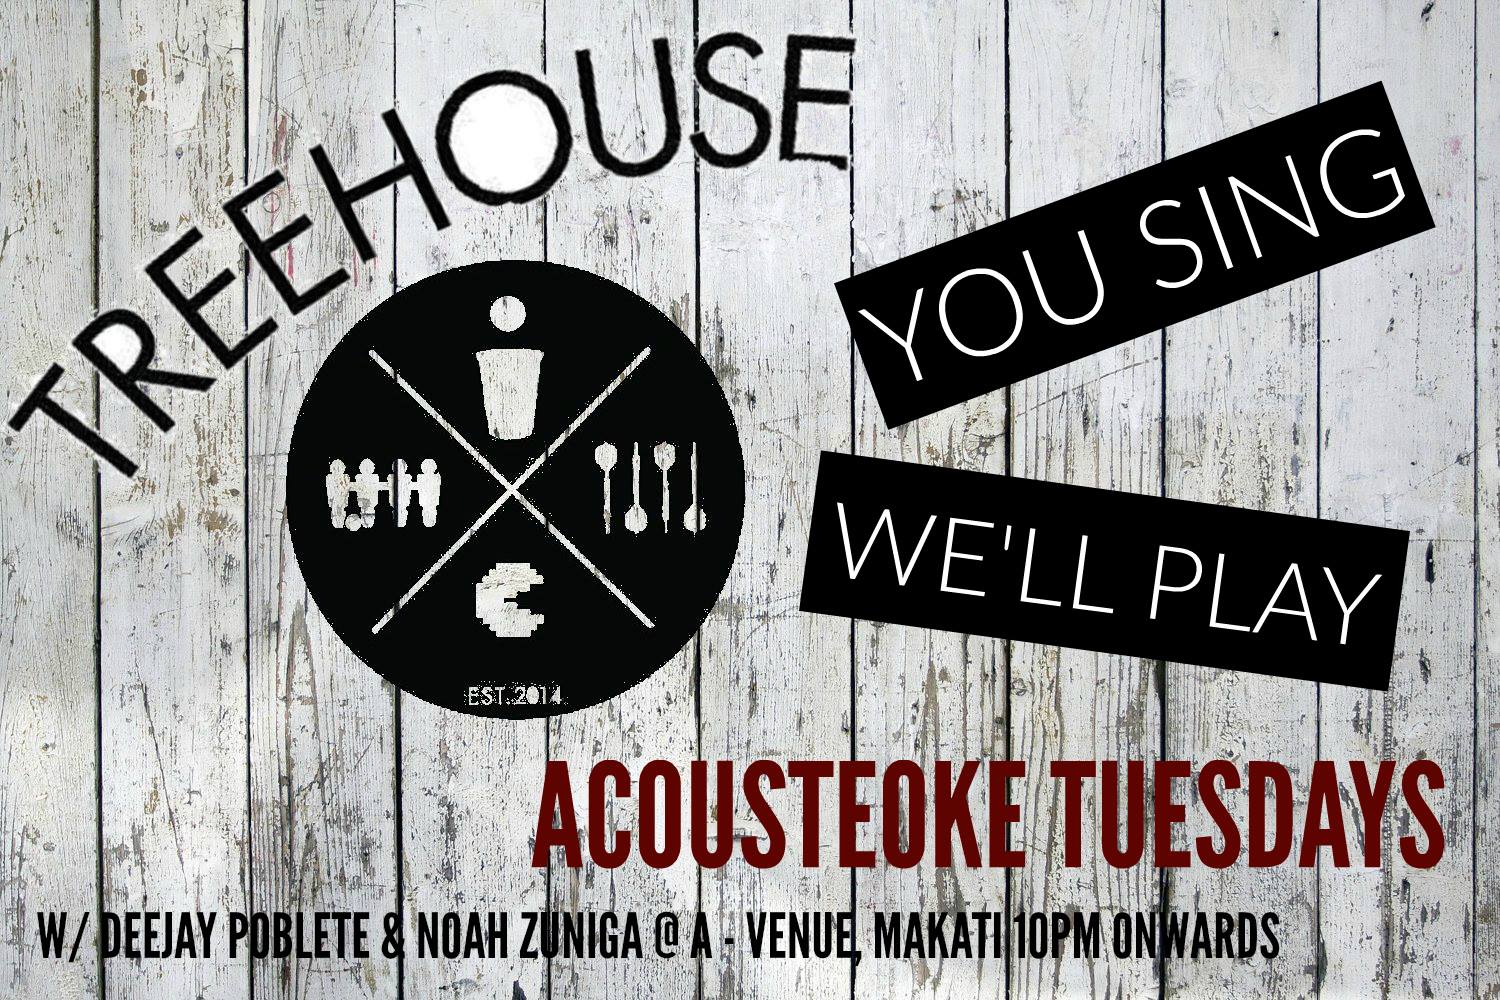 Acousteoke Tuesdays at TreeHouse, A-venue, Makati Tuesday, November 24 at 10:00pm Tomorrow · 94°F / 75°F Partly Cloudy pin Show Map TreehousePh 2nd Floor, A-Venue Makati Ave, Makati, Philippines envelope Invited by Deejay Poblete It's Acousteoke Tuesday! Come prepared or not! It doesn't matter! YOLO!